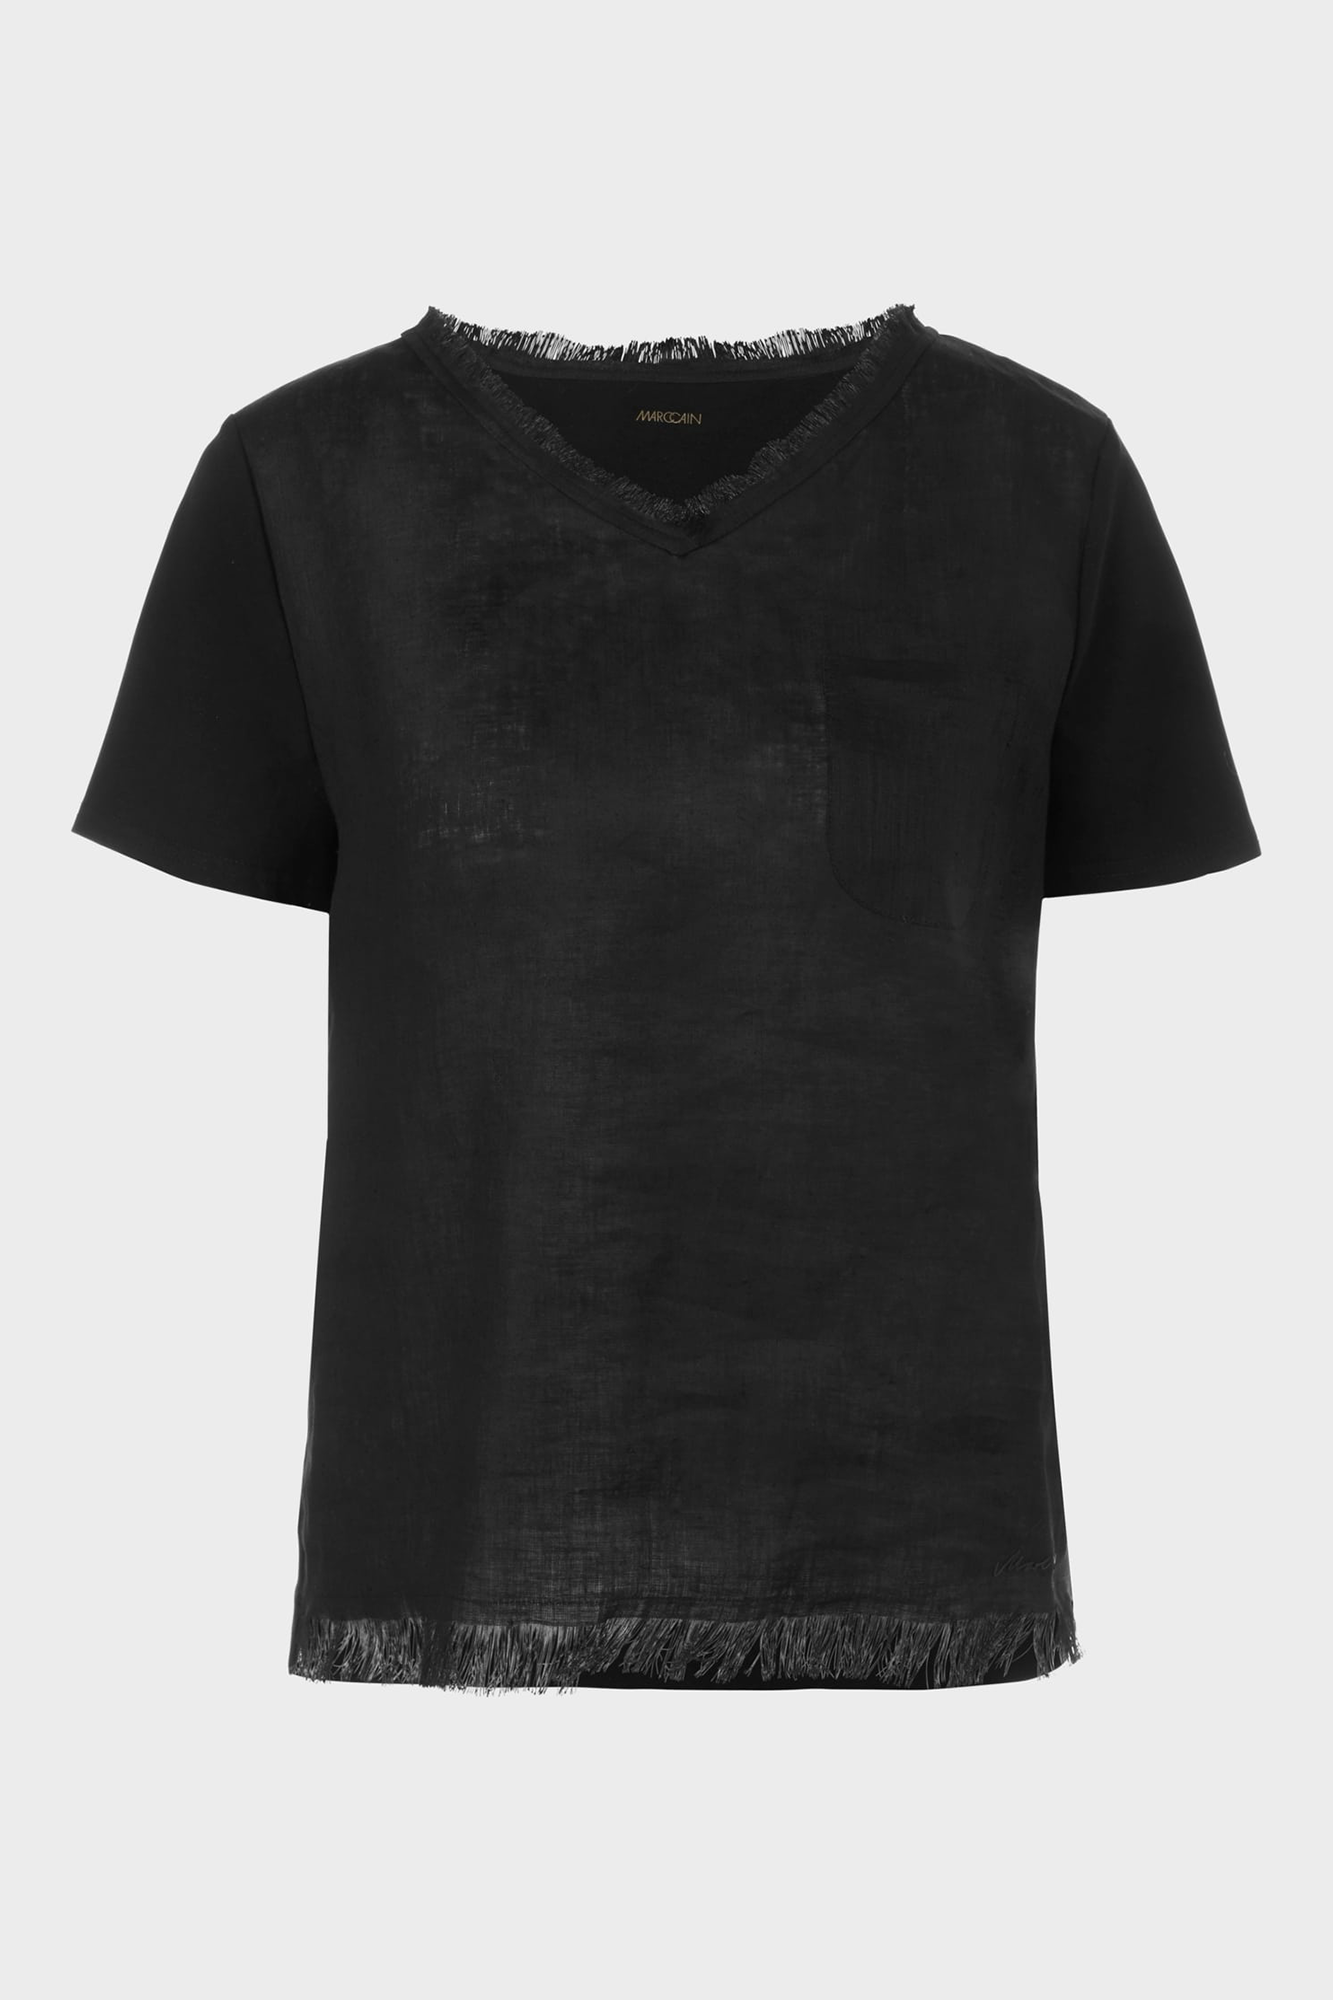 Ourika Gardens T-Shirt in A Mix of Material Black